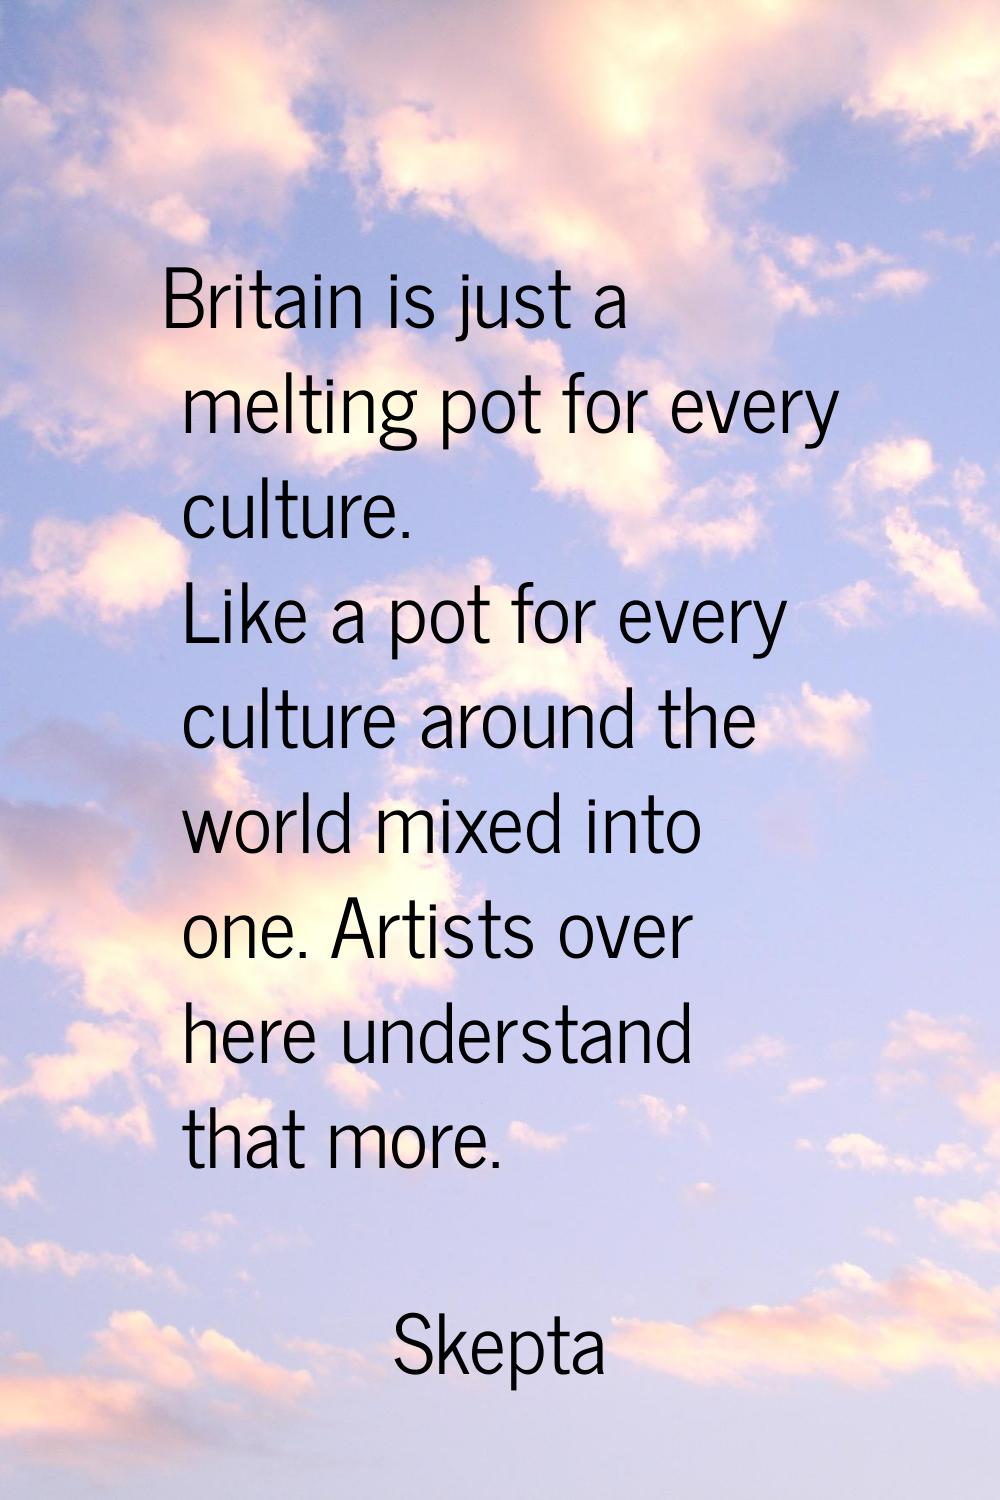 Britain is just a melting pot for every culture. Like a pot for every culture around the world mixe